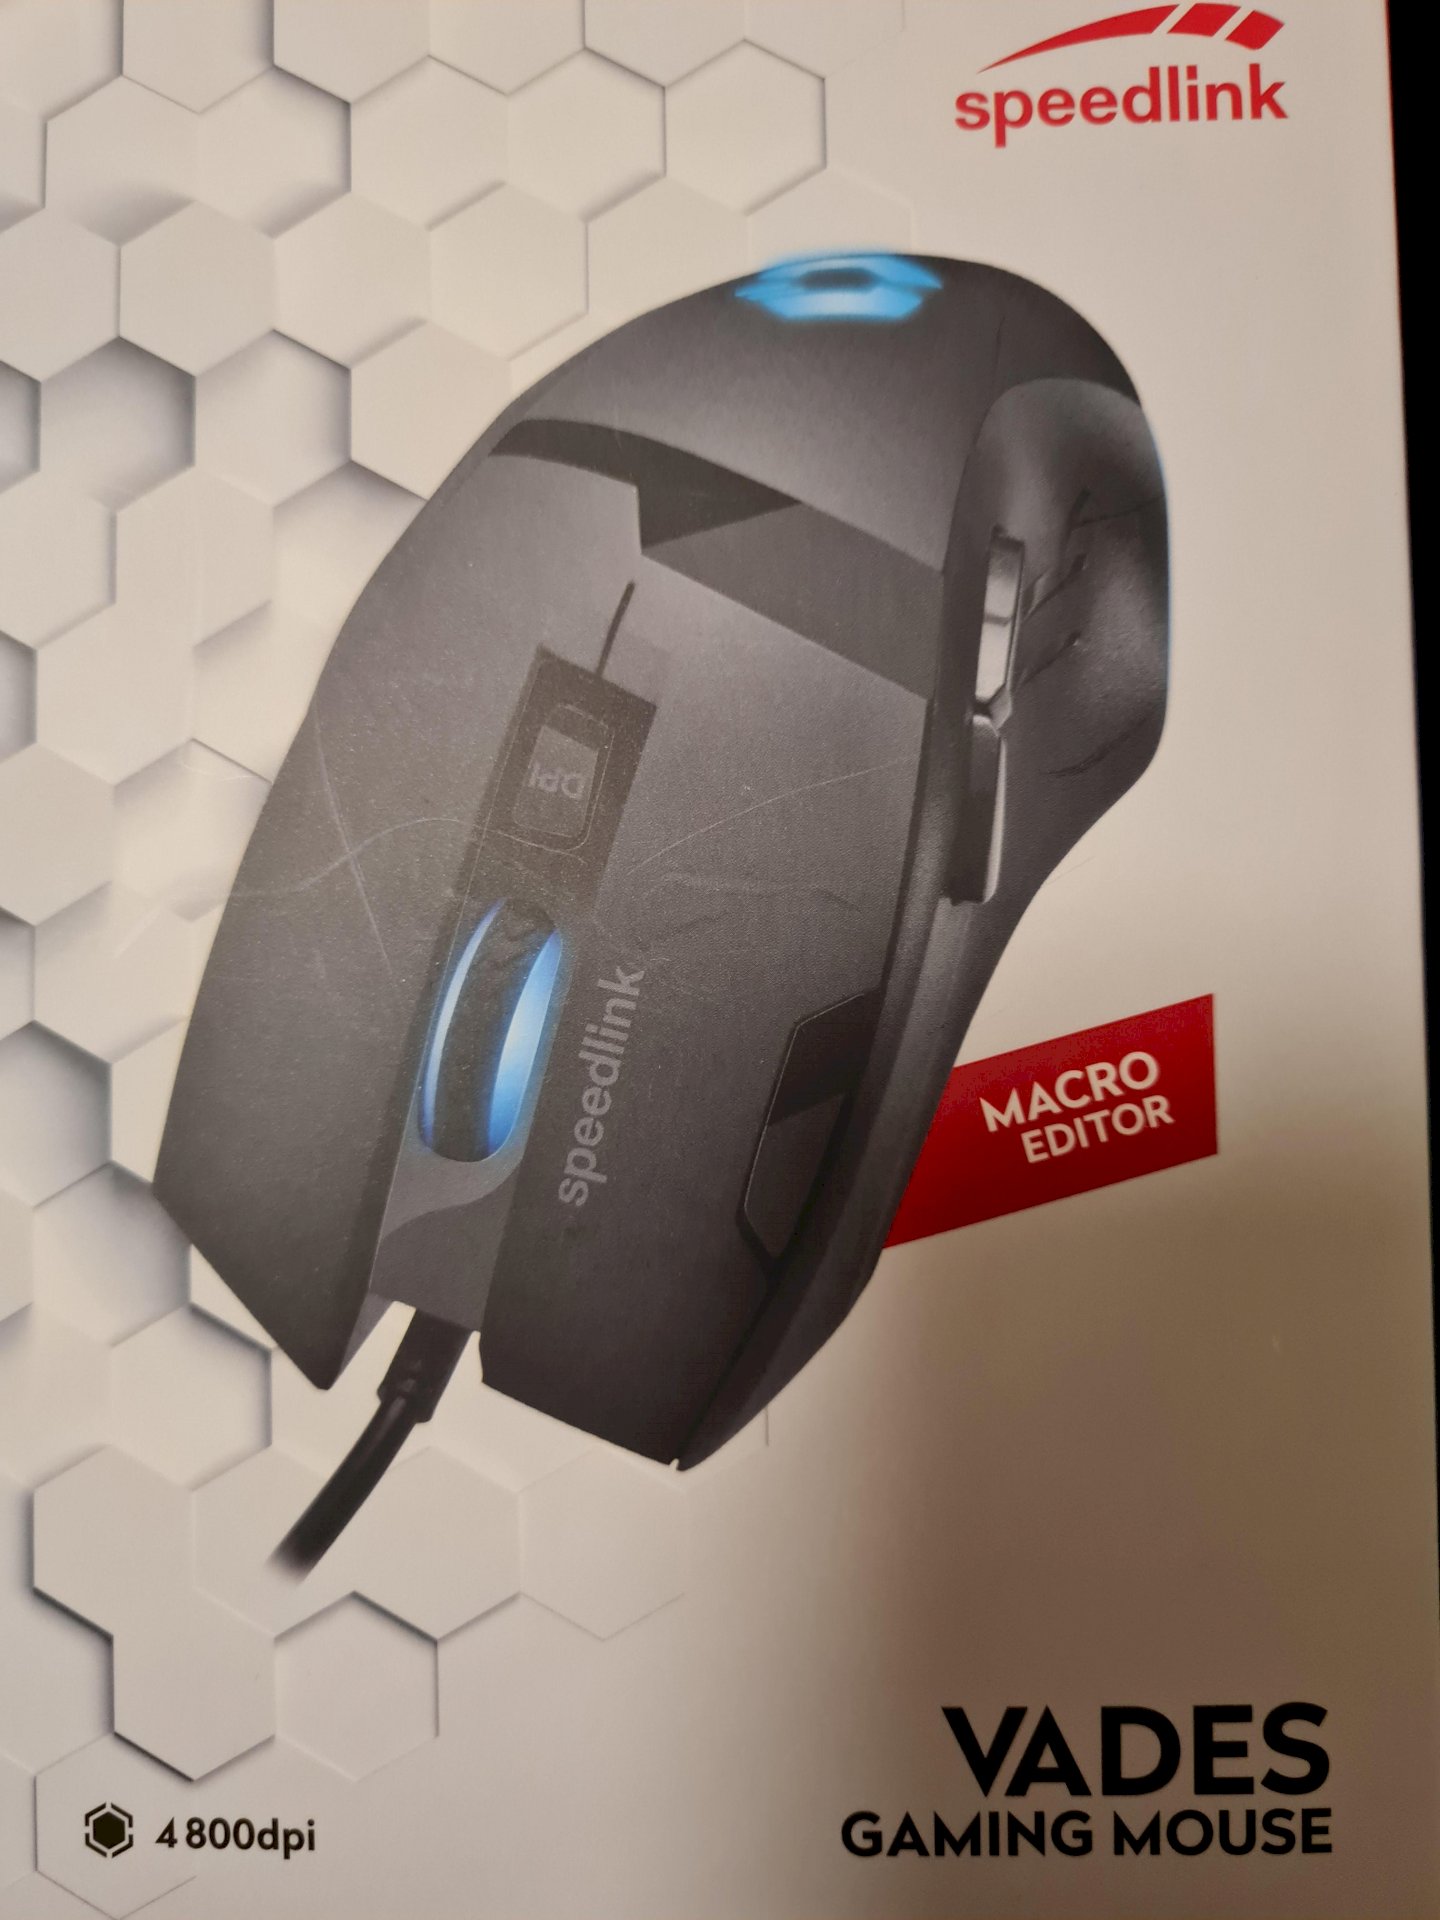 What do you think of this mouse - 1